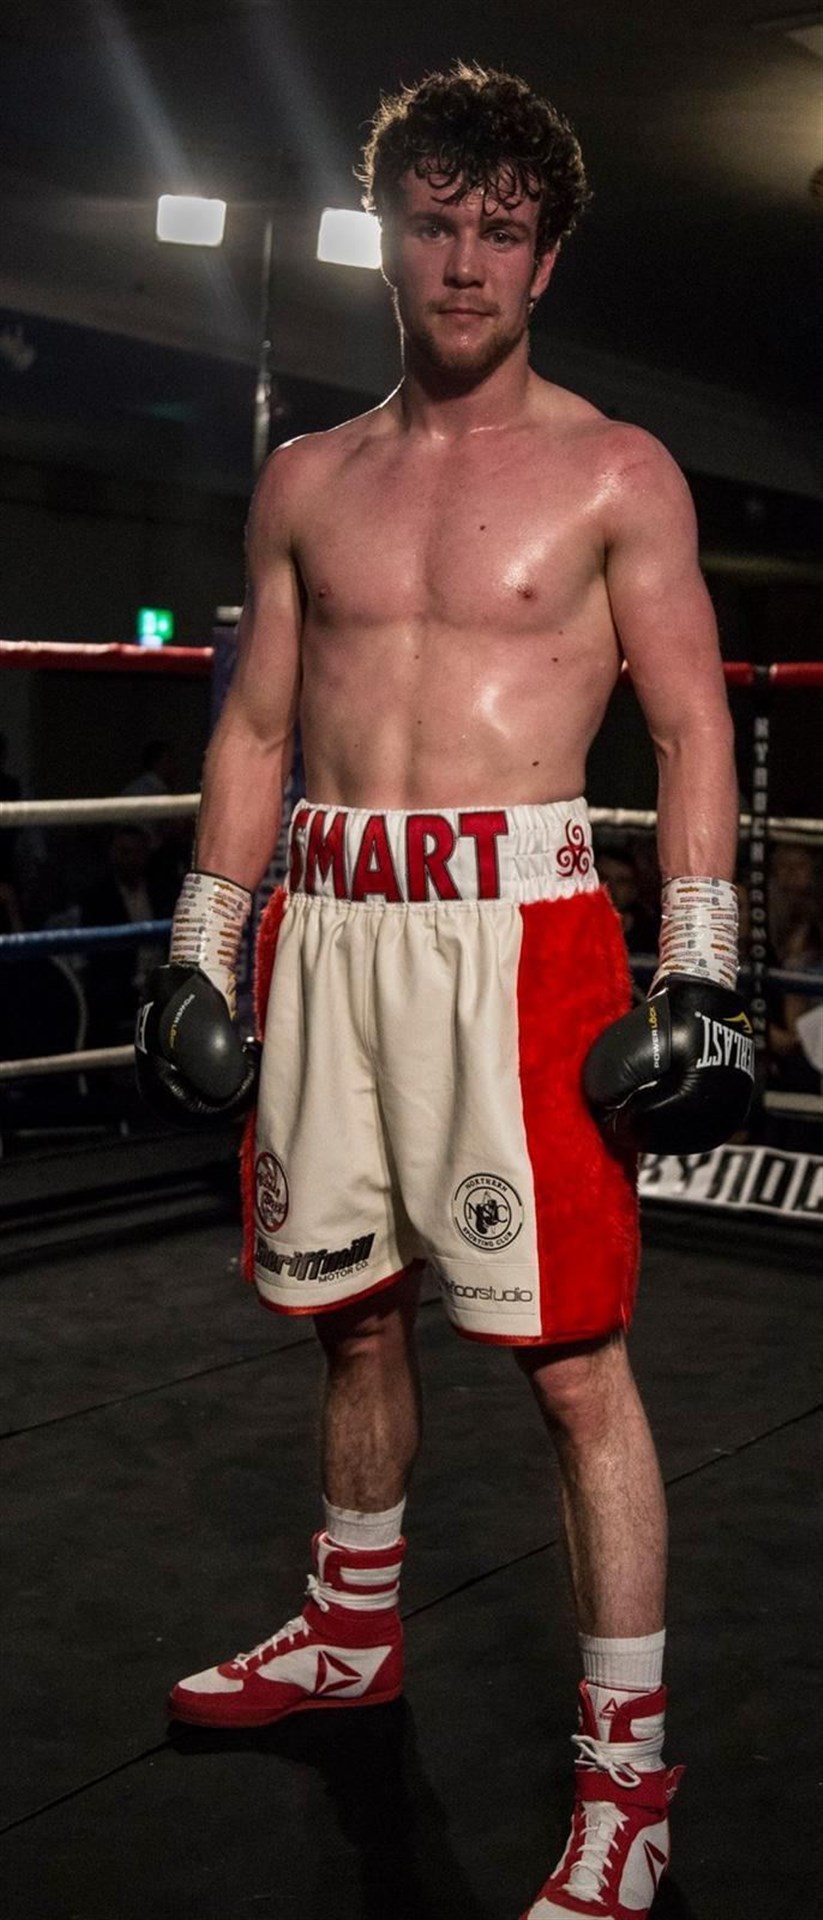 Andrew Smart is top of the bill at a Homecoming professional boxing show in Elgin.